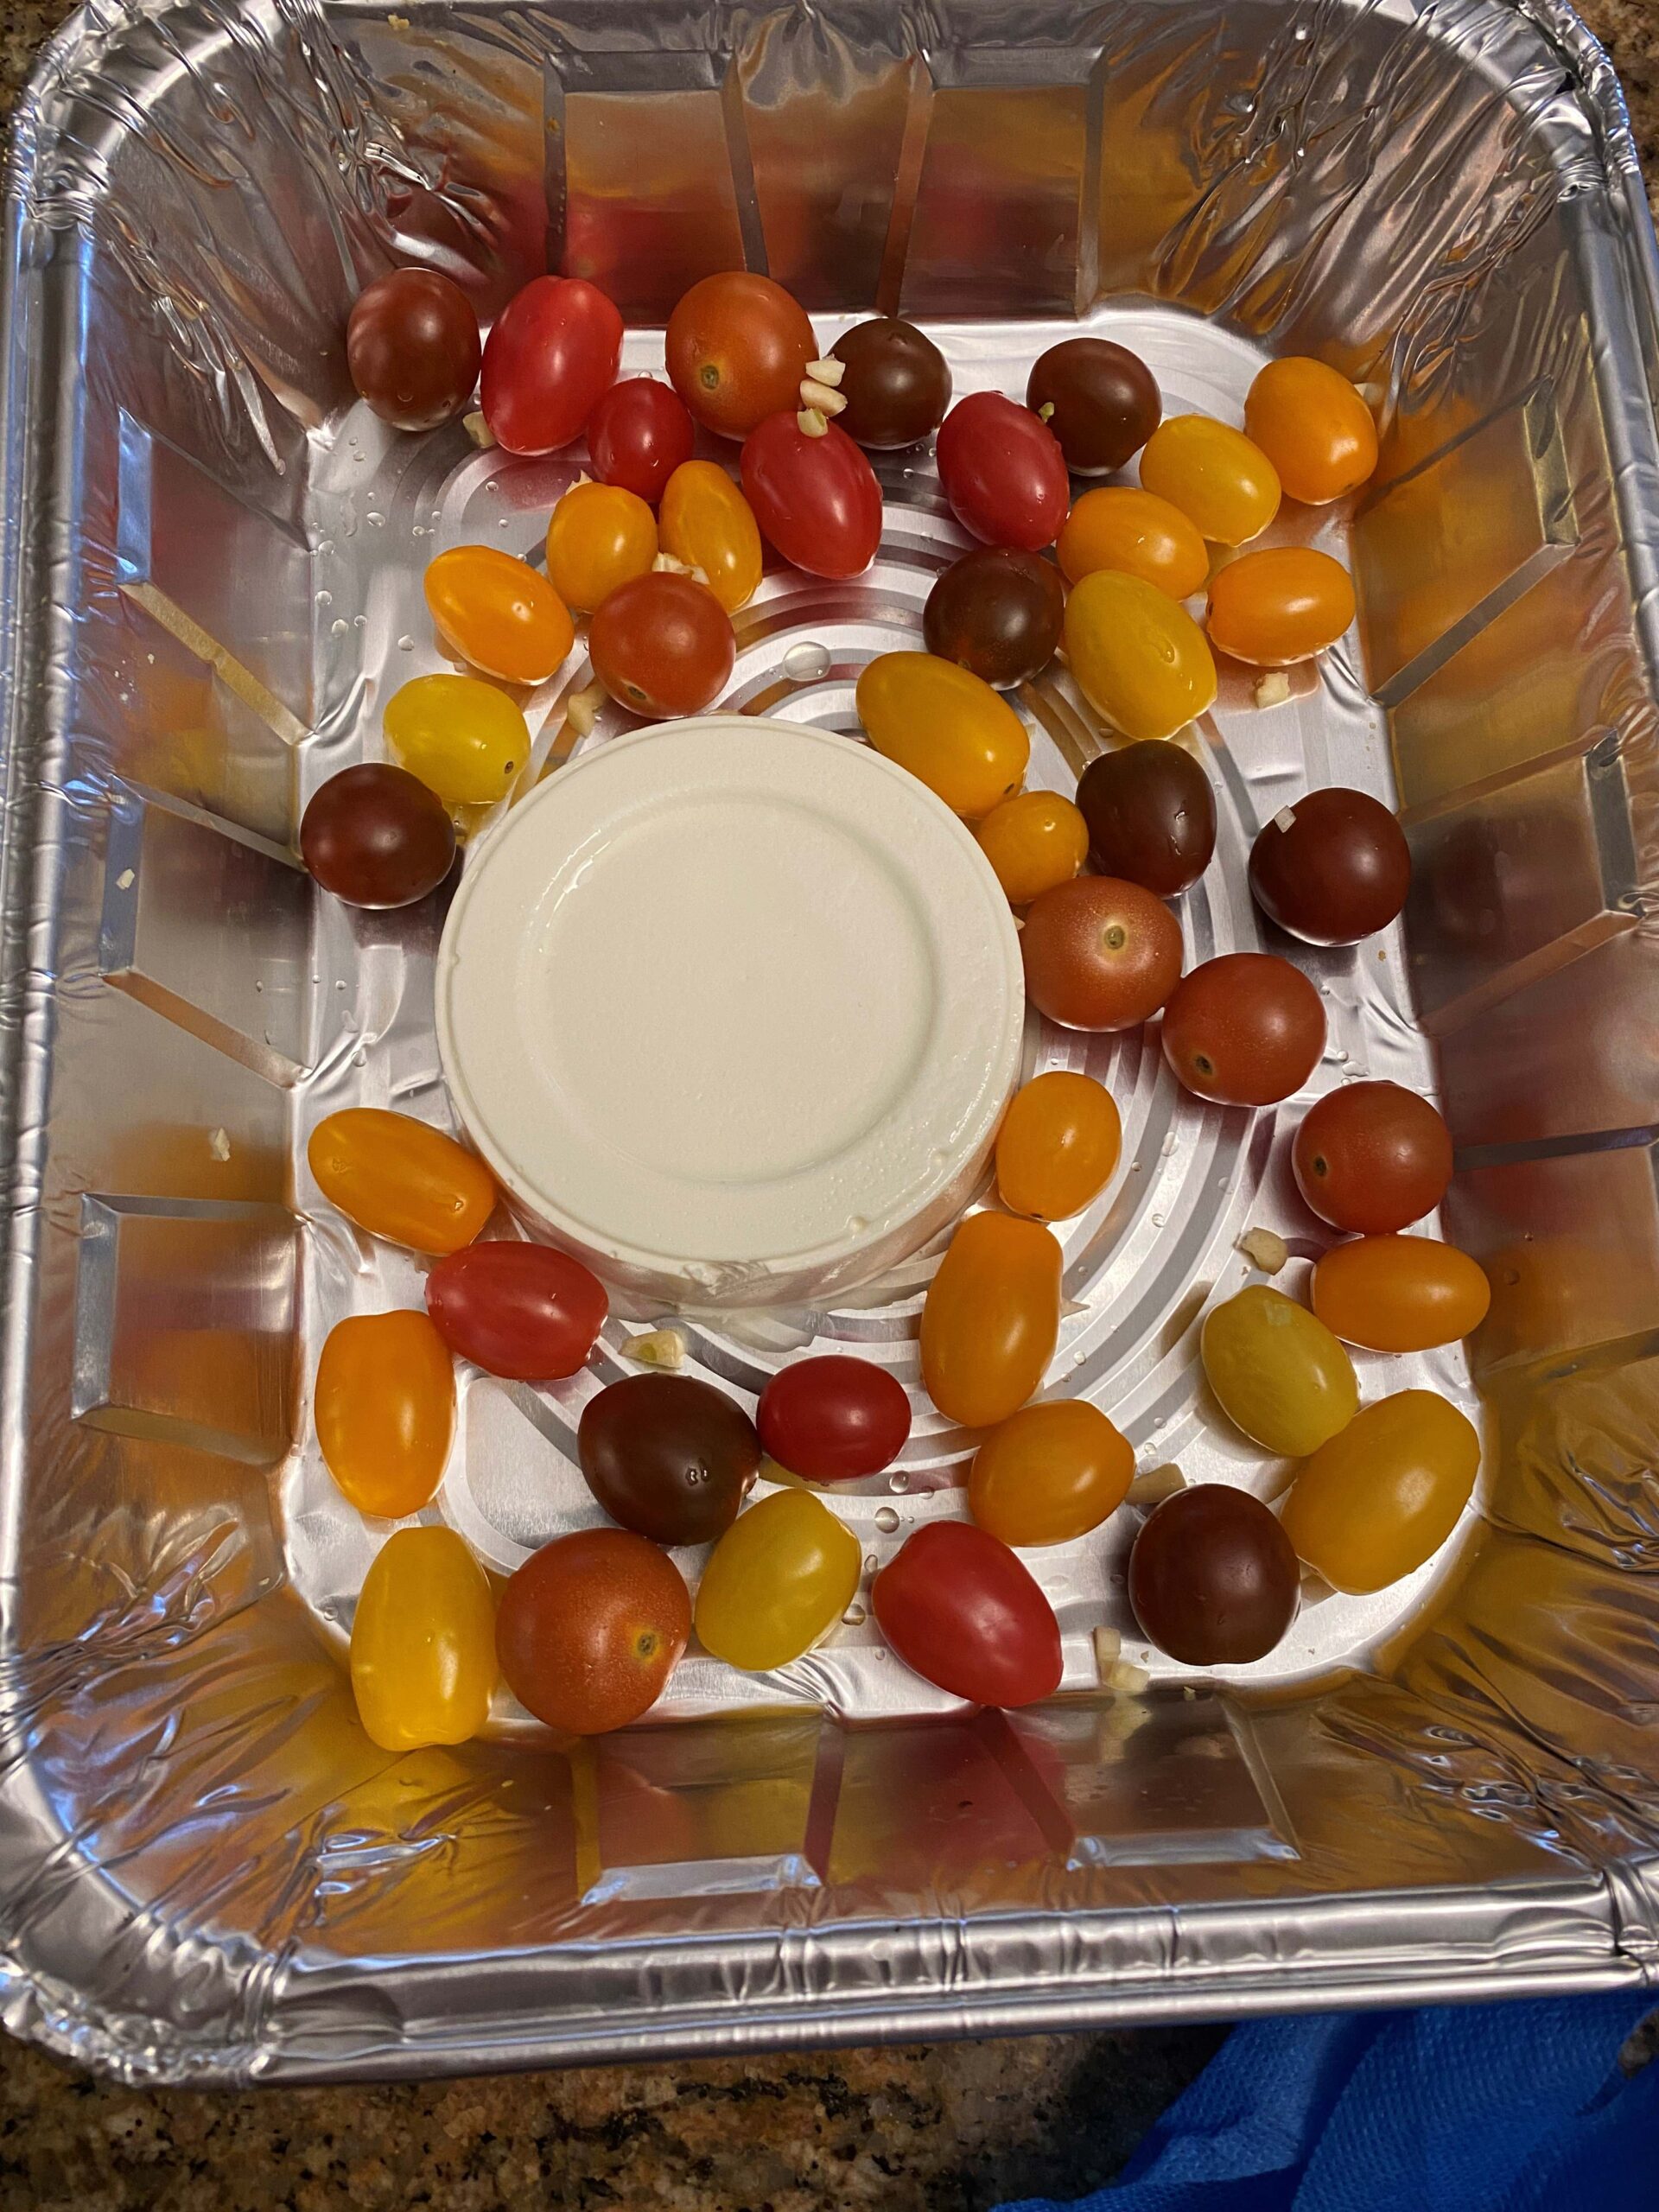 Cherry Tomatoes and Feta in an Aluminum Tray